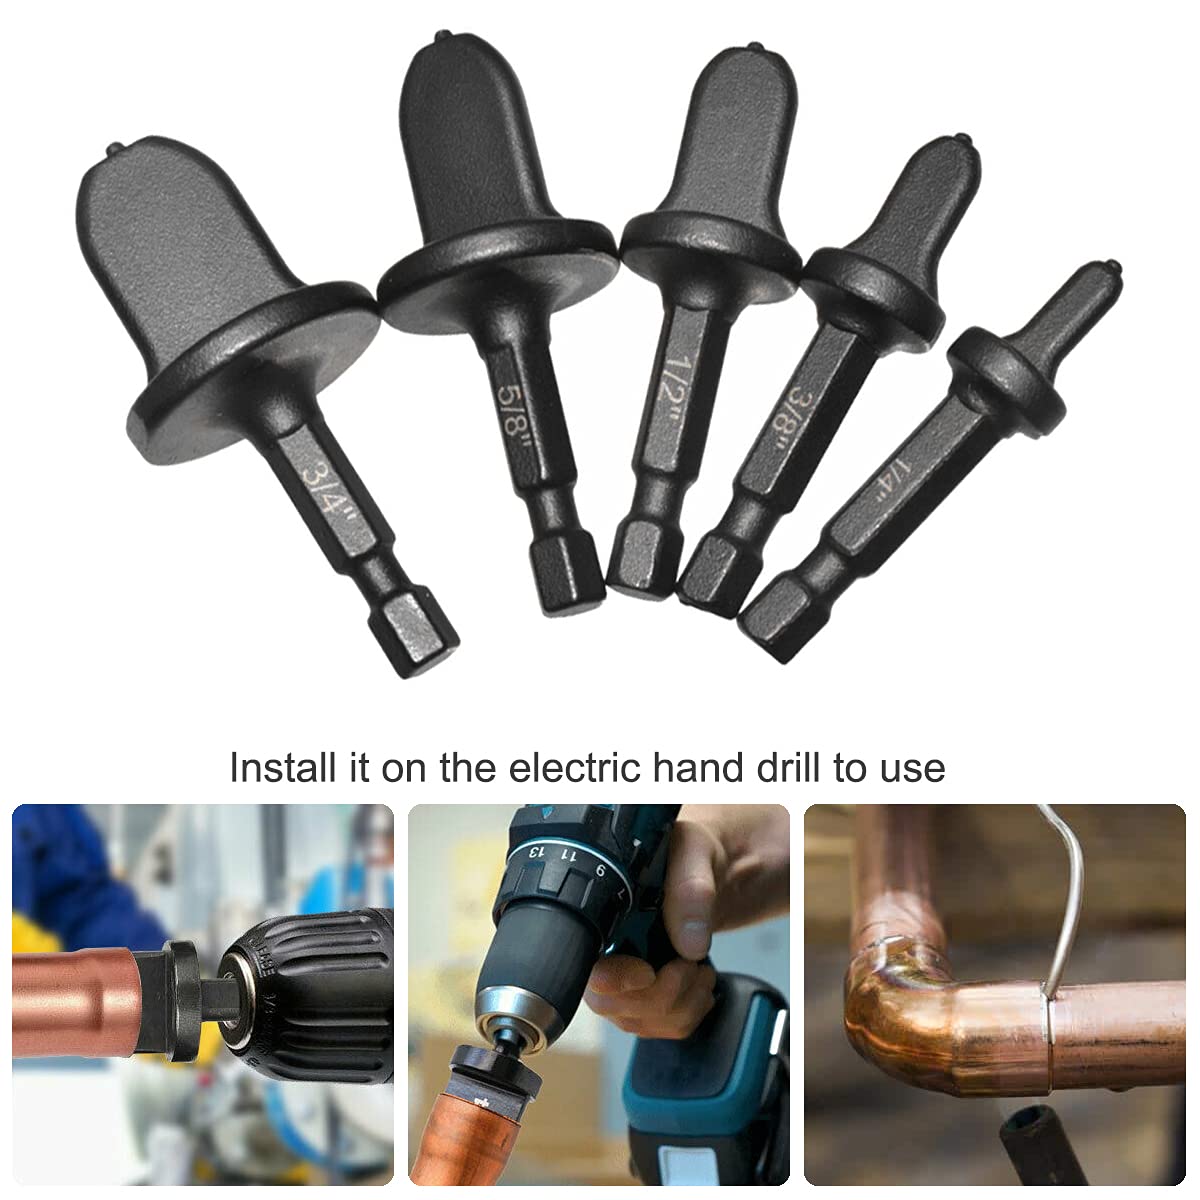 Saipe 5 Pcs Swaging Tool Drill Bit Set 1/4 Inch Hex Shank Copper Pipe Flaring Tool Tube Expander Air Conditioner Copper Pipe Swaging Flaring Tool for Copper Tubing (1/4'', 3/8'', 1/2'', 5/8'', 3/4'')